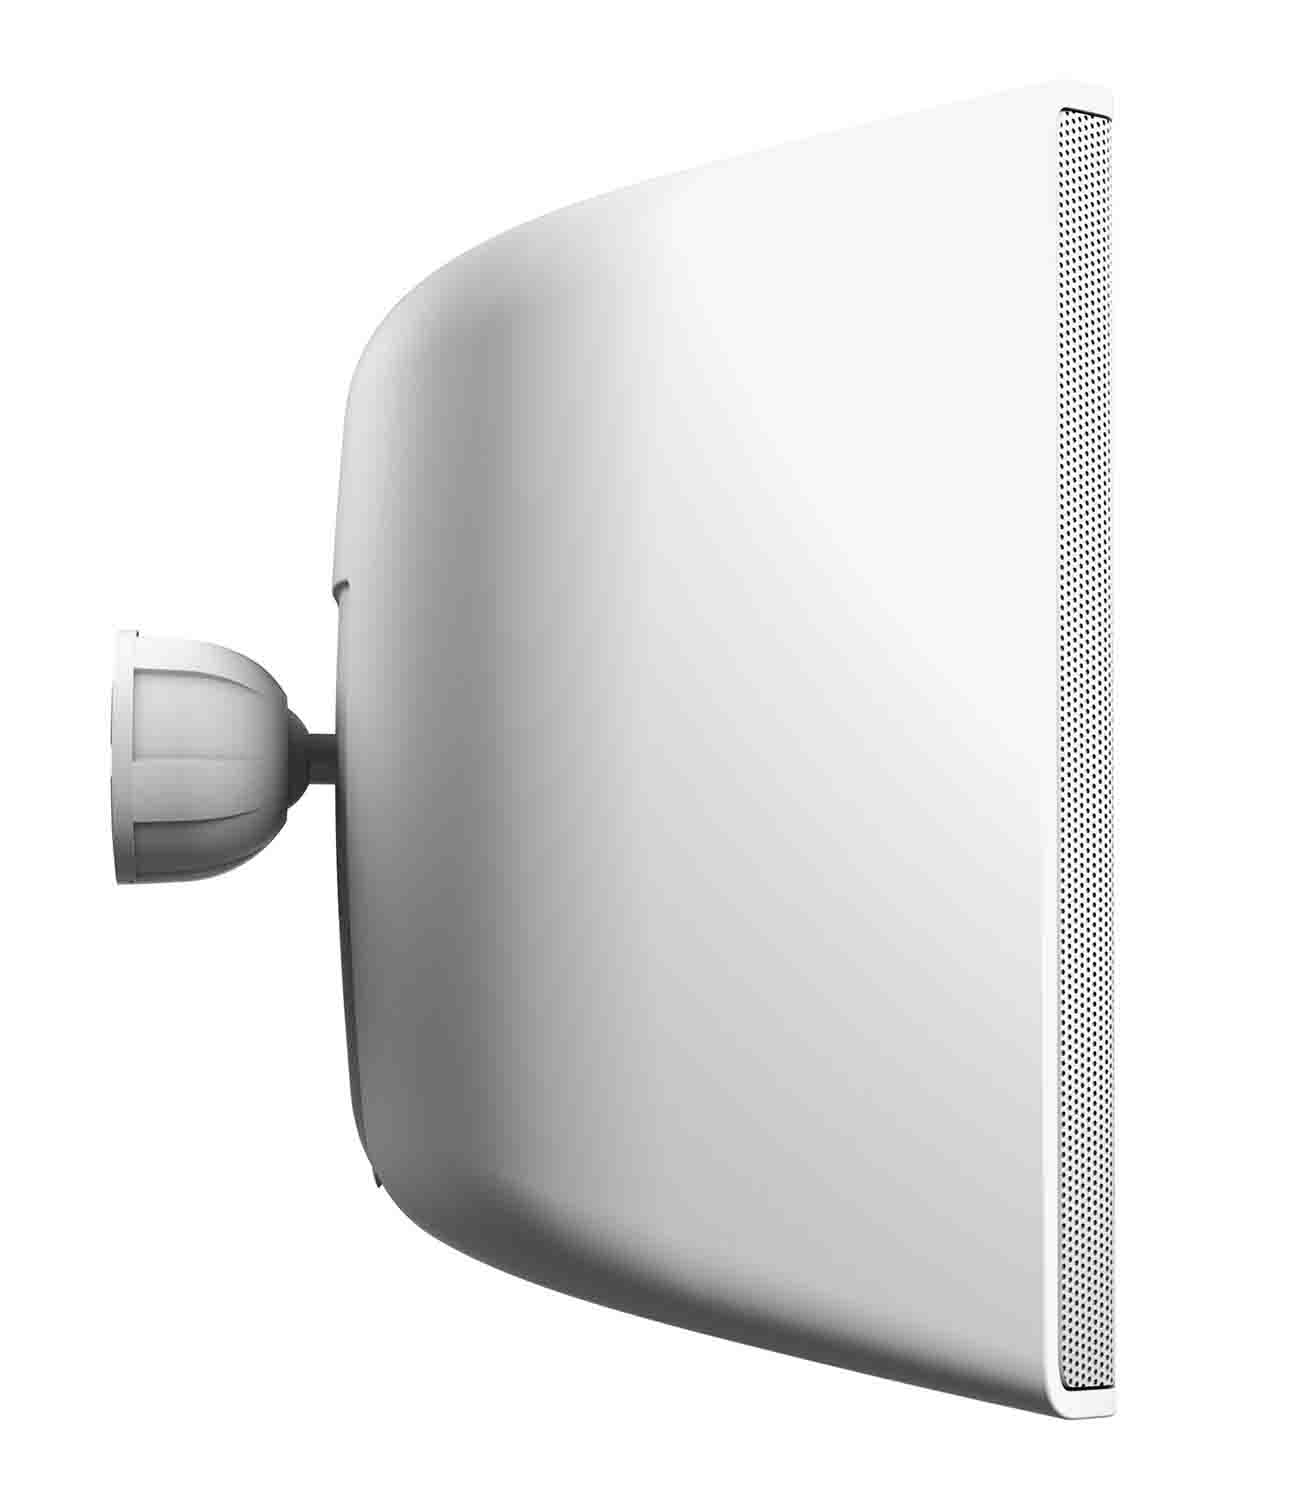 LD Systems DQOR 8 W, 8" Two-Way Passive In/Out Door Installation Loudspeaker 8 Ohm - White by LD Systems